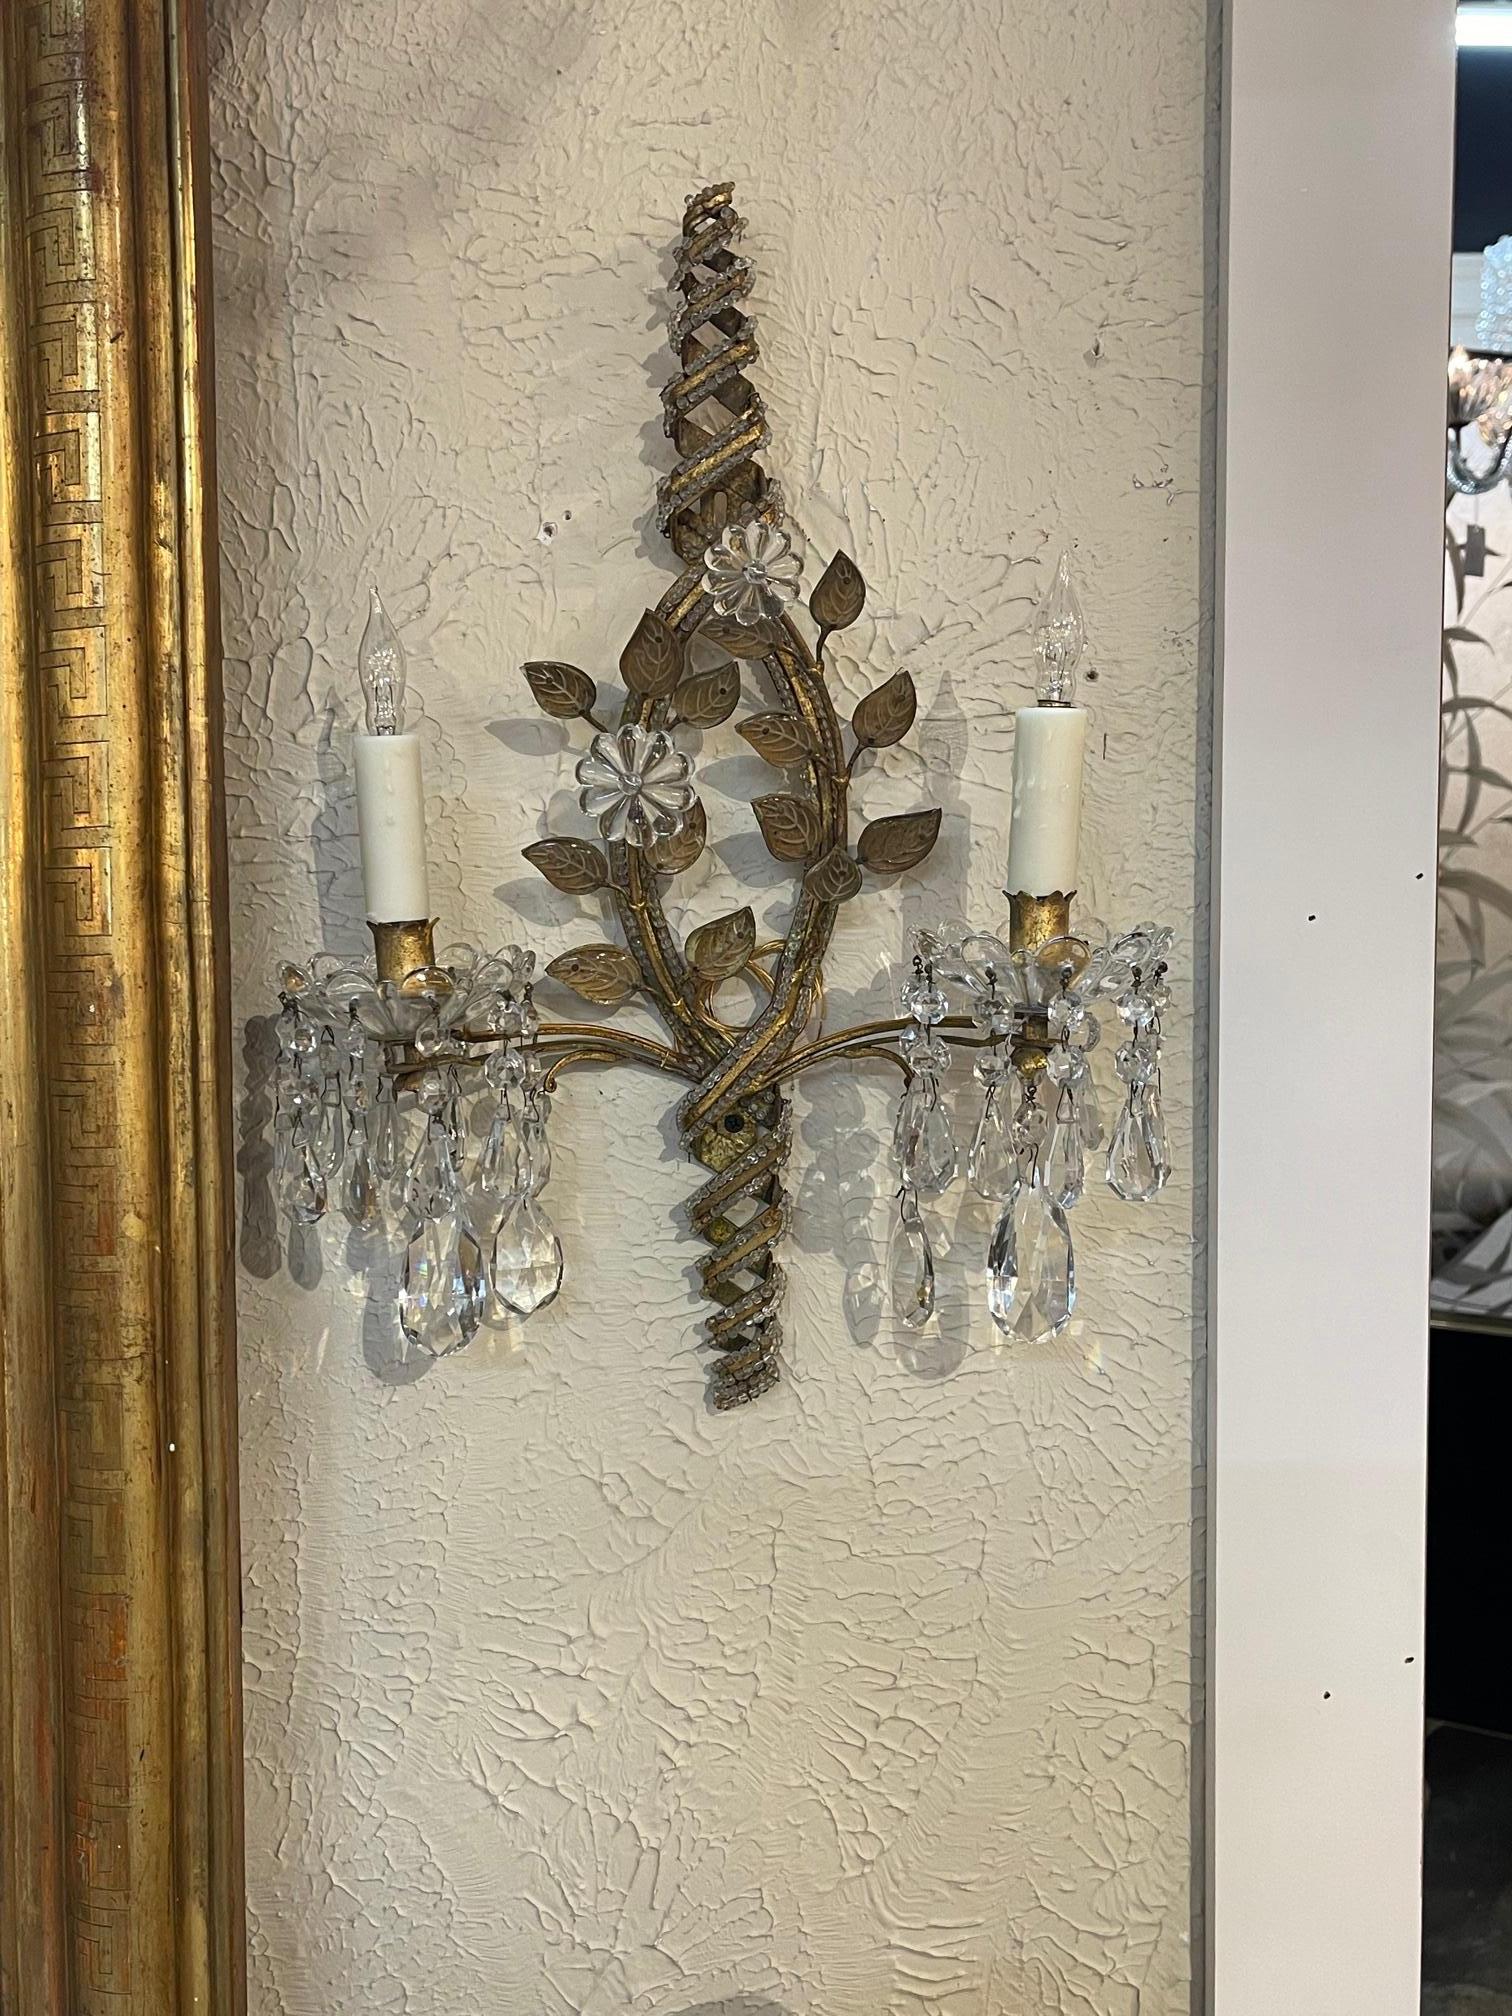 Pair of French Bagues beaded crystal and gilt metal 2 light sconces. Circa 1940. The sconces have been professionally rewired and ready to hang. A fine addition to any home!